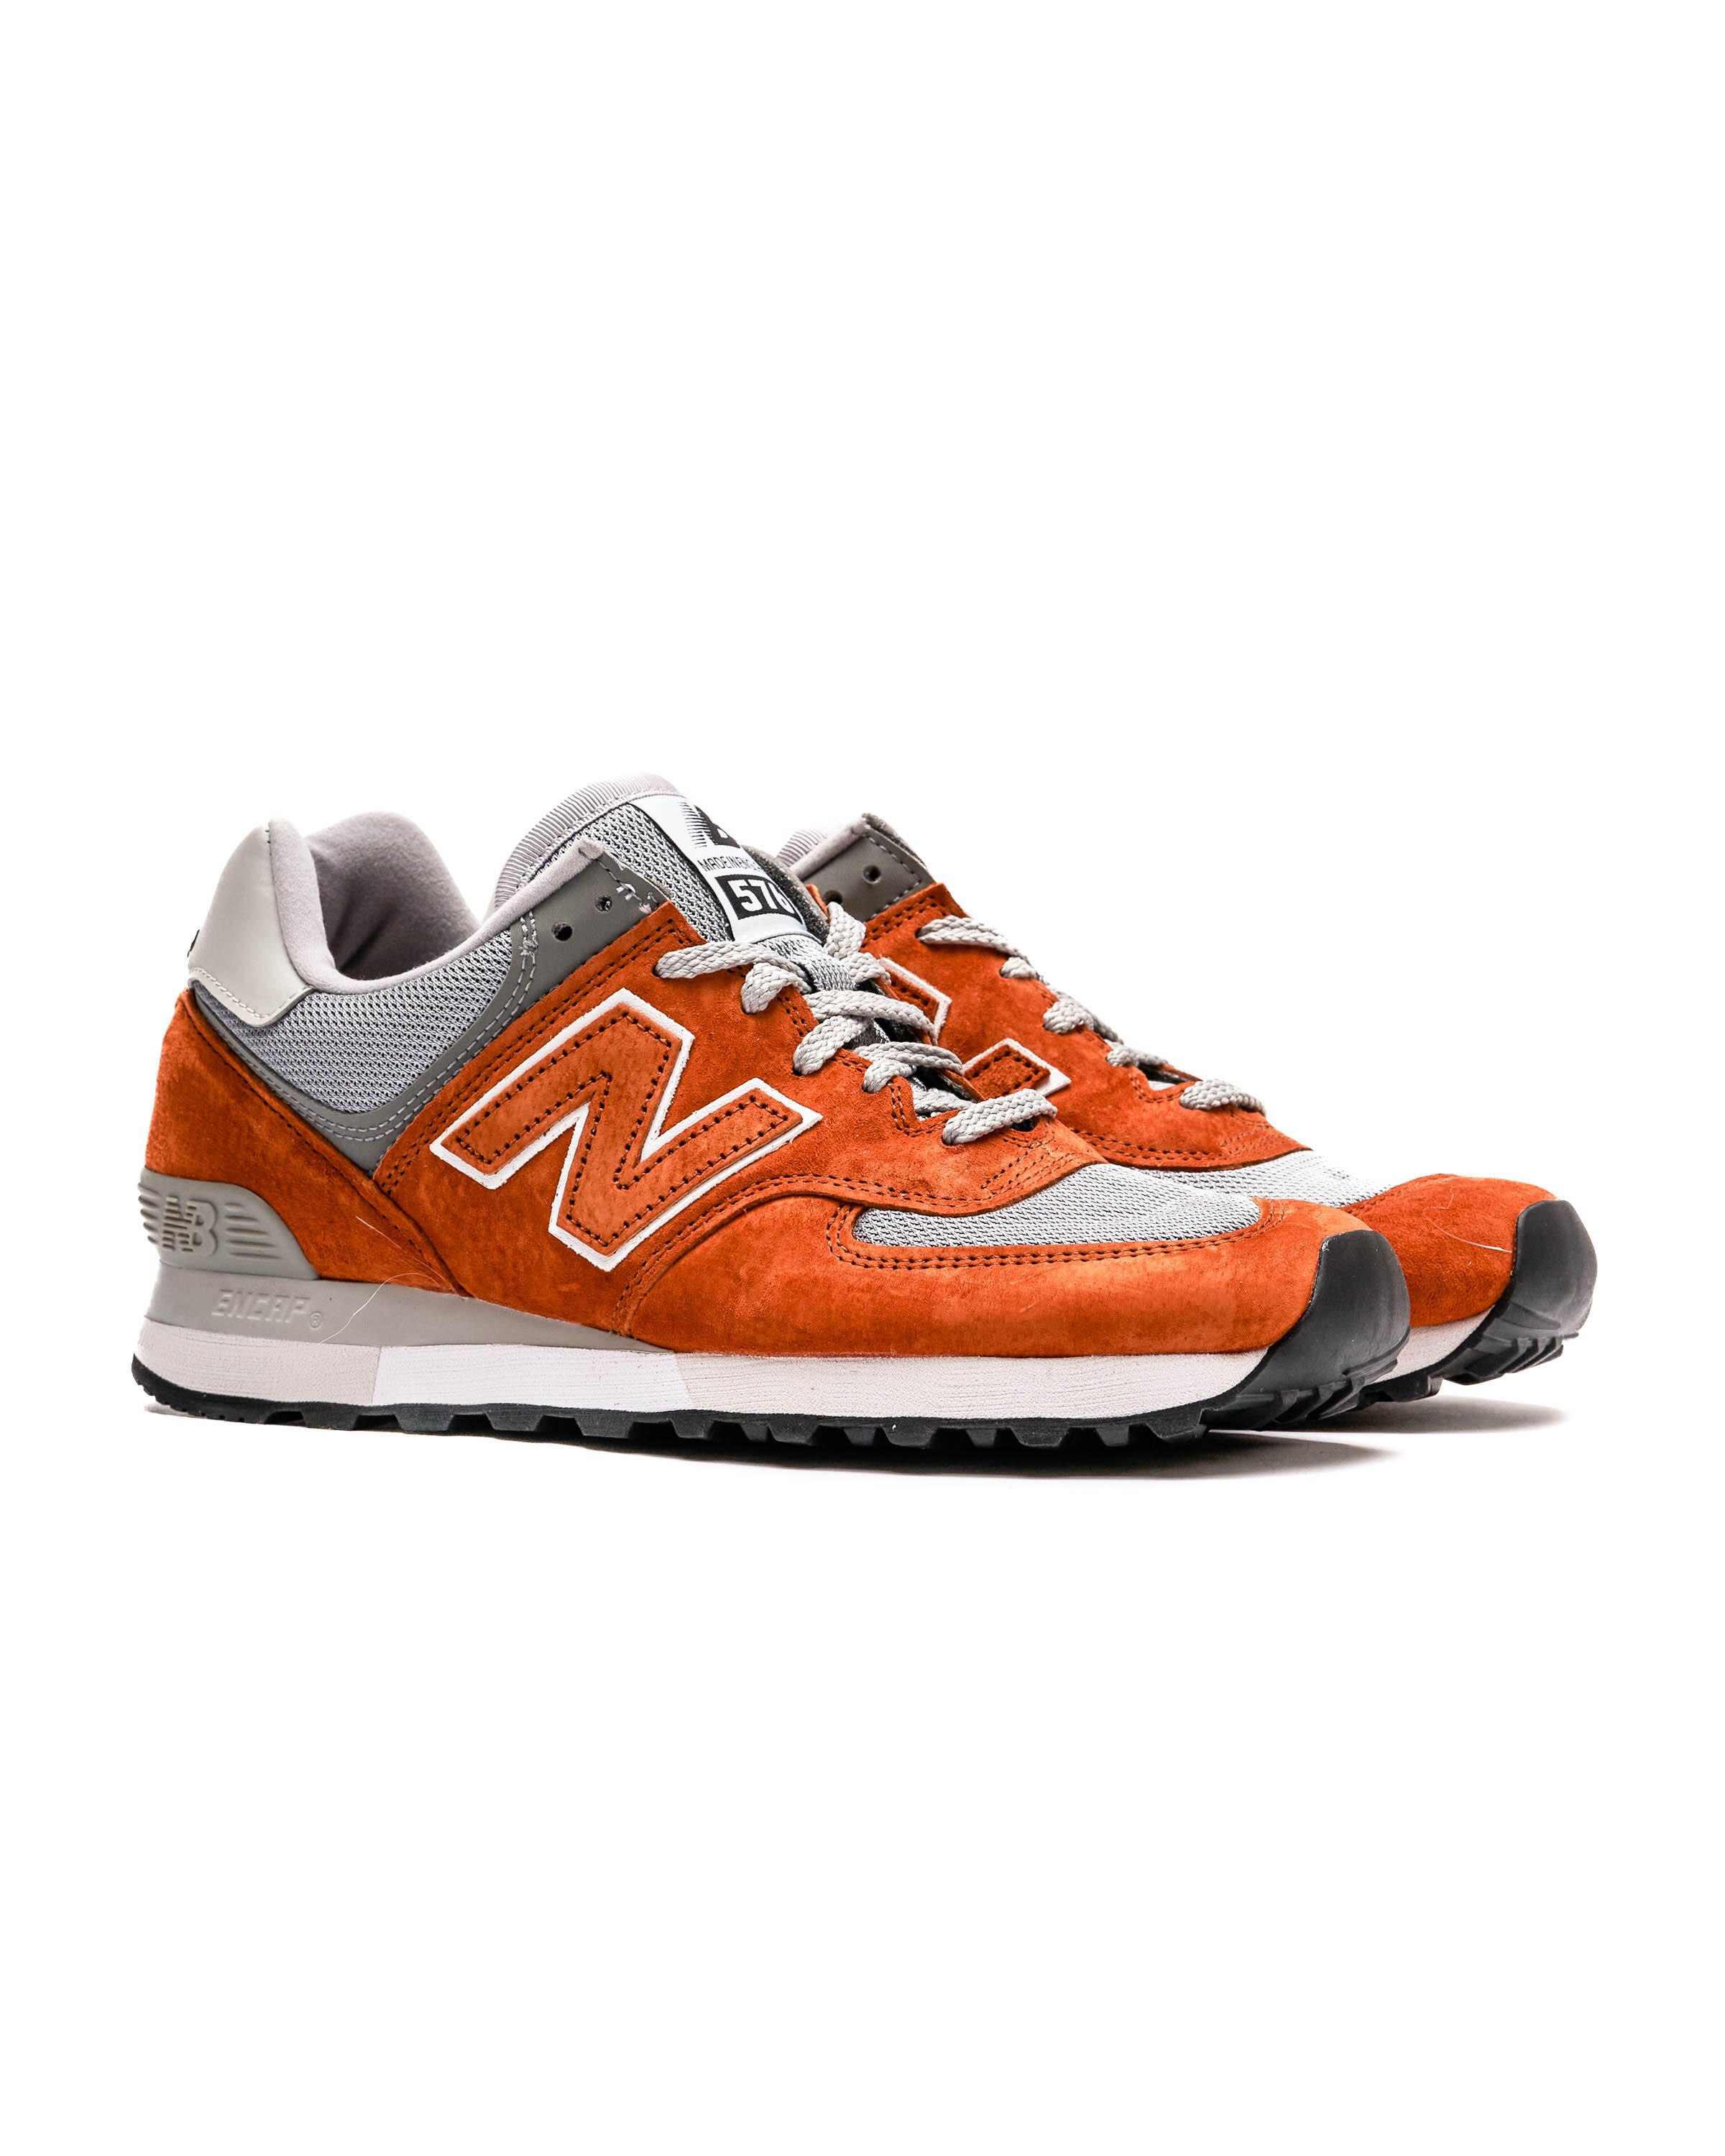 New Balance OU 576 OOK - Made in England | OU576OOK | AFEW STORE